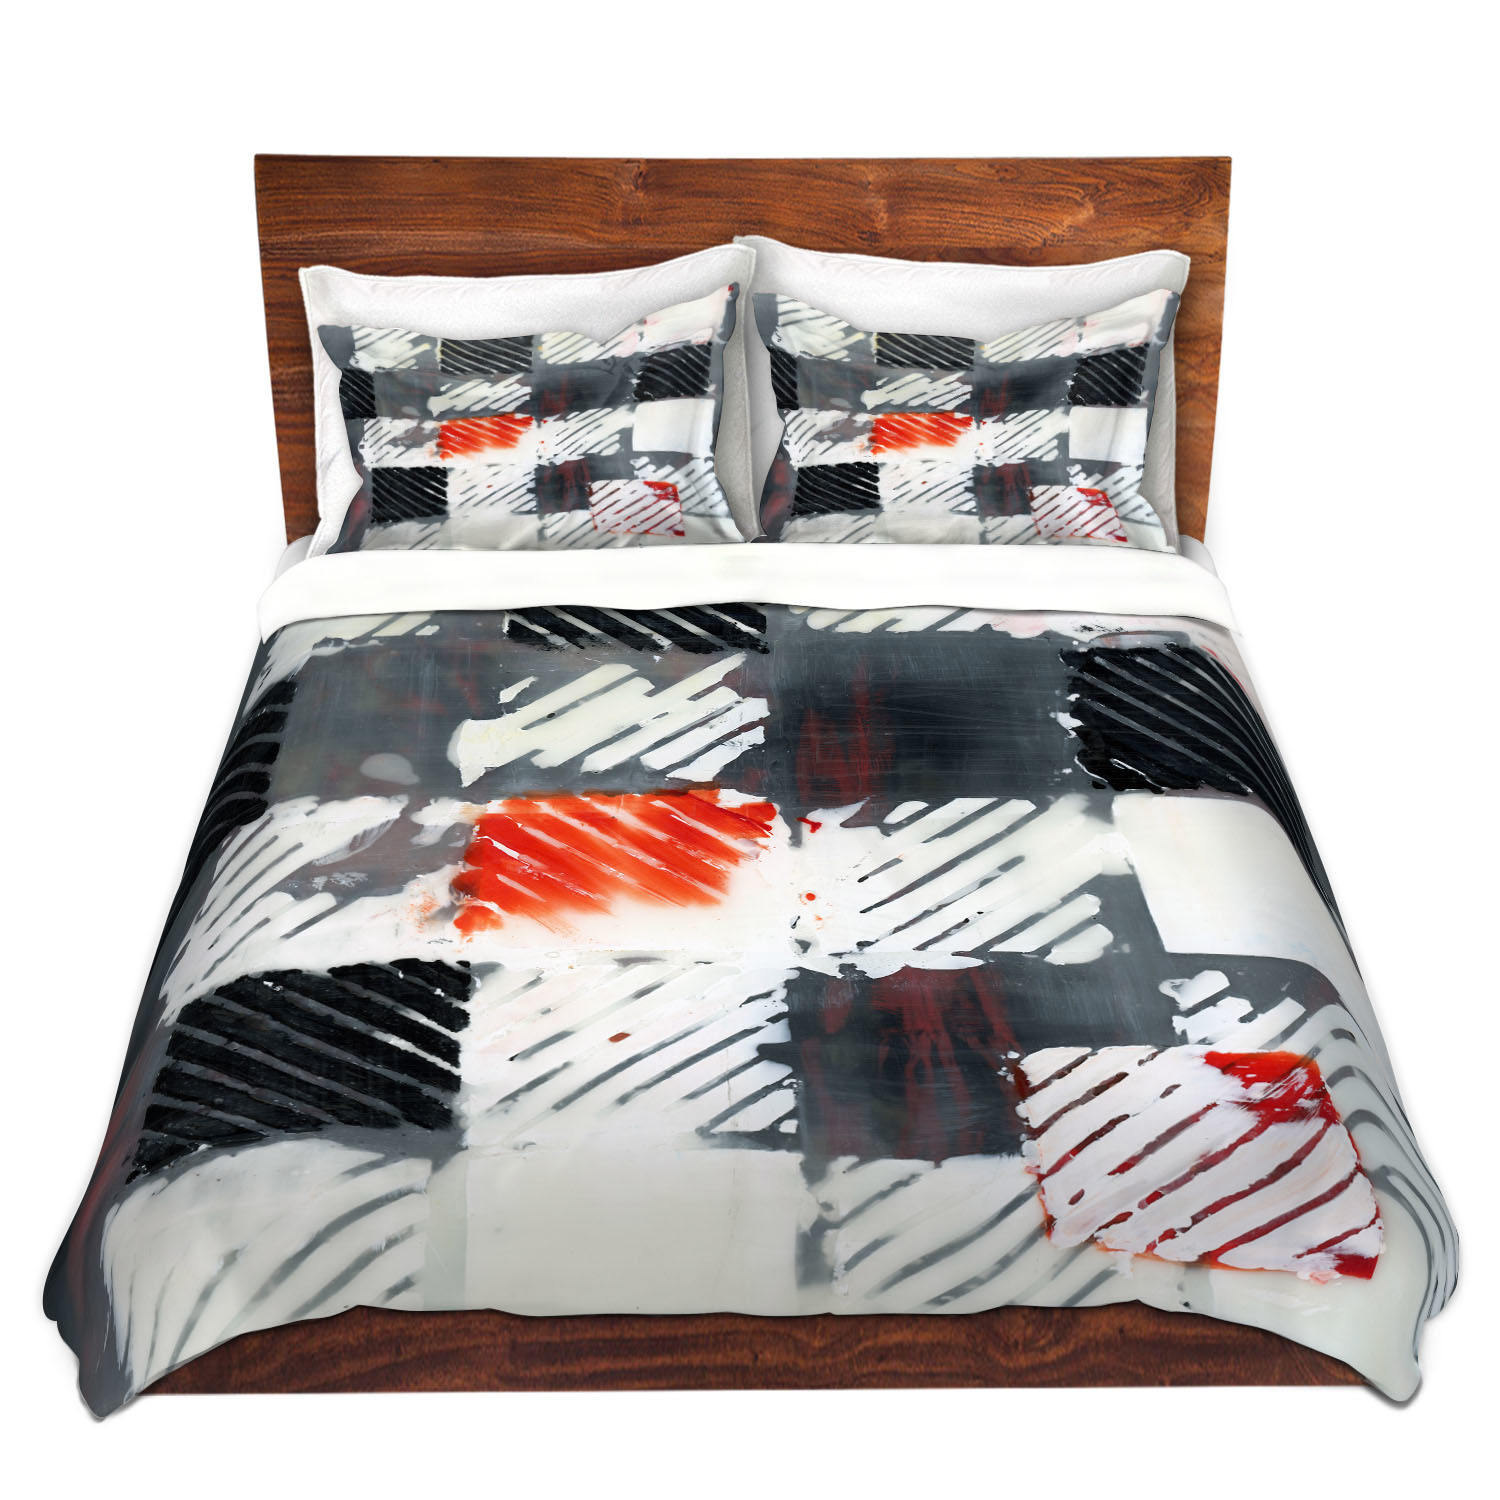 Dianoche Microfiber Duvet Covers By Dora Ficher - Not Always Black Or White 7